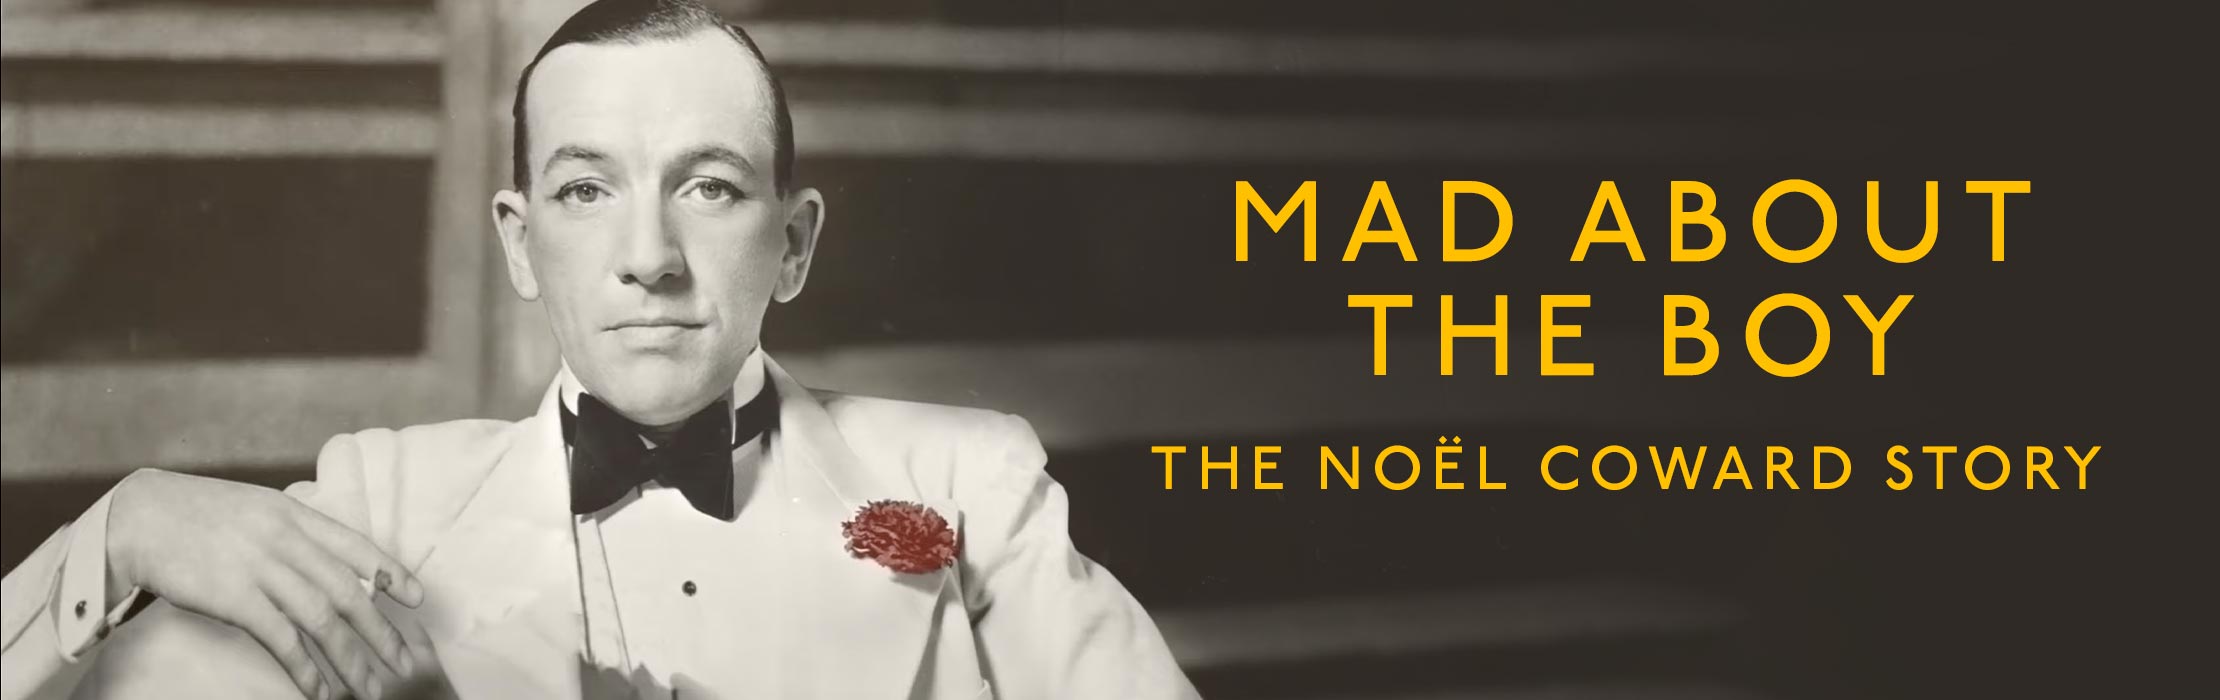 Mad About The Boy The Noel Coward Story